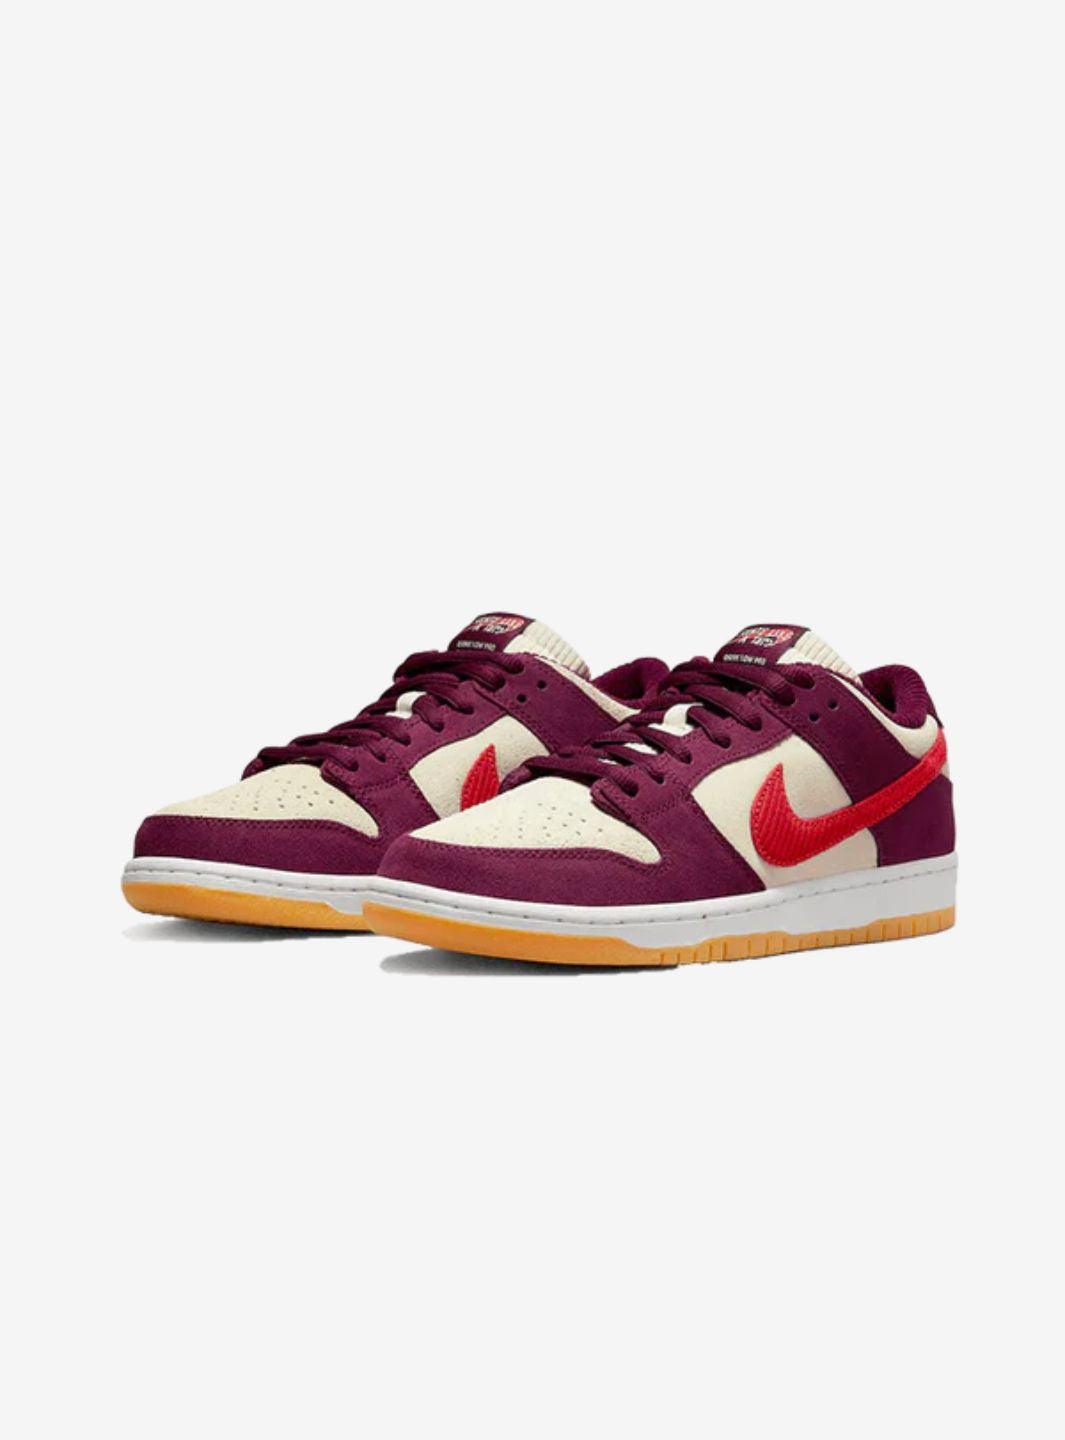 Nike SB Dunk Low Skate Like a Girl - DX4589-600 | ResellZone